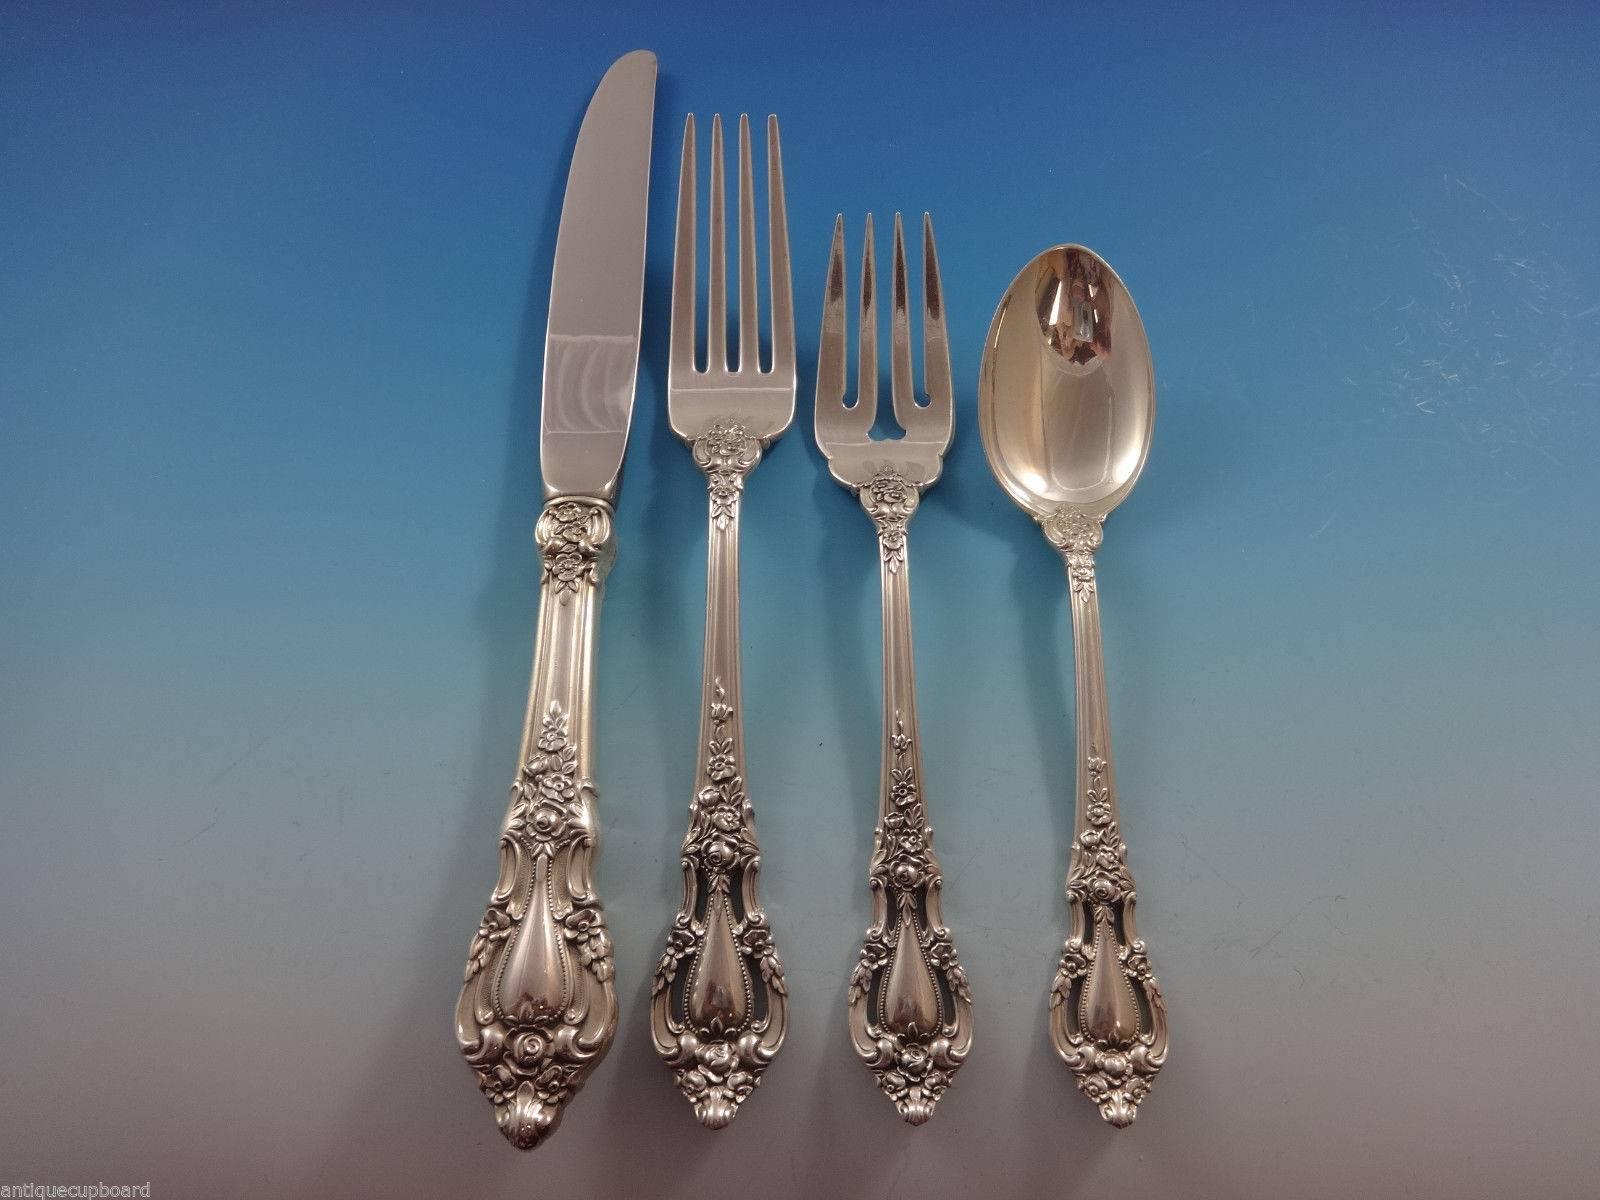 Stunning ELOQUENCE BY LUNT Sterling Silver flatware set - 34 pieces. This set includes:

8 KNIVES, 9 1/8